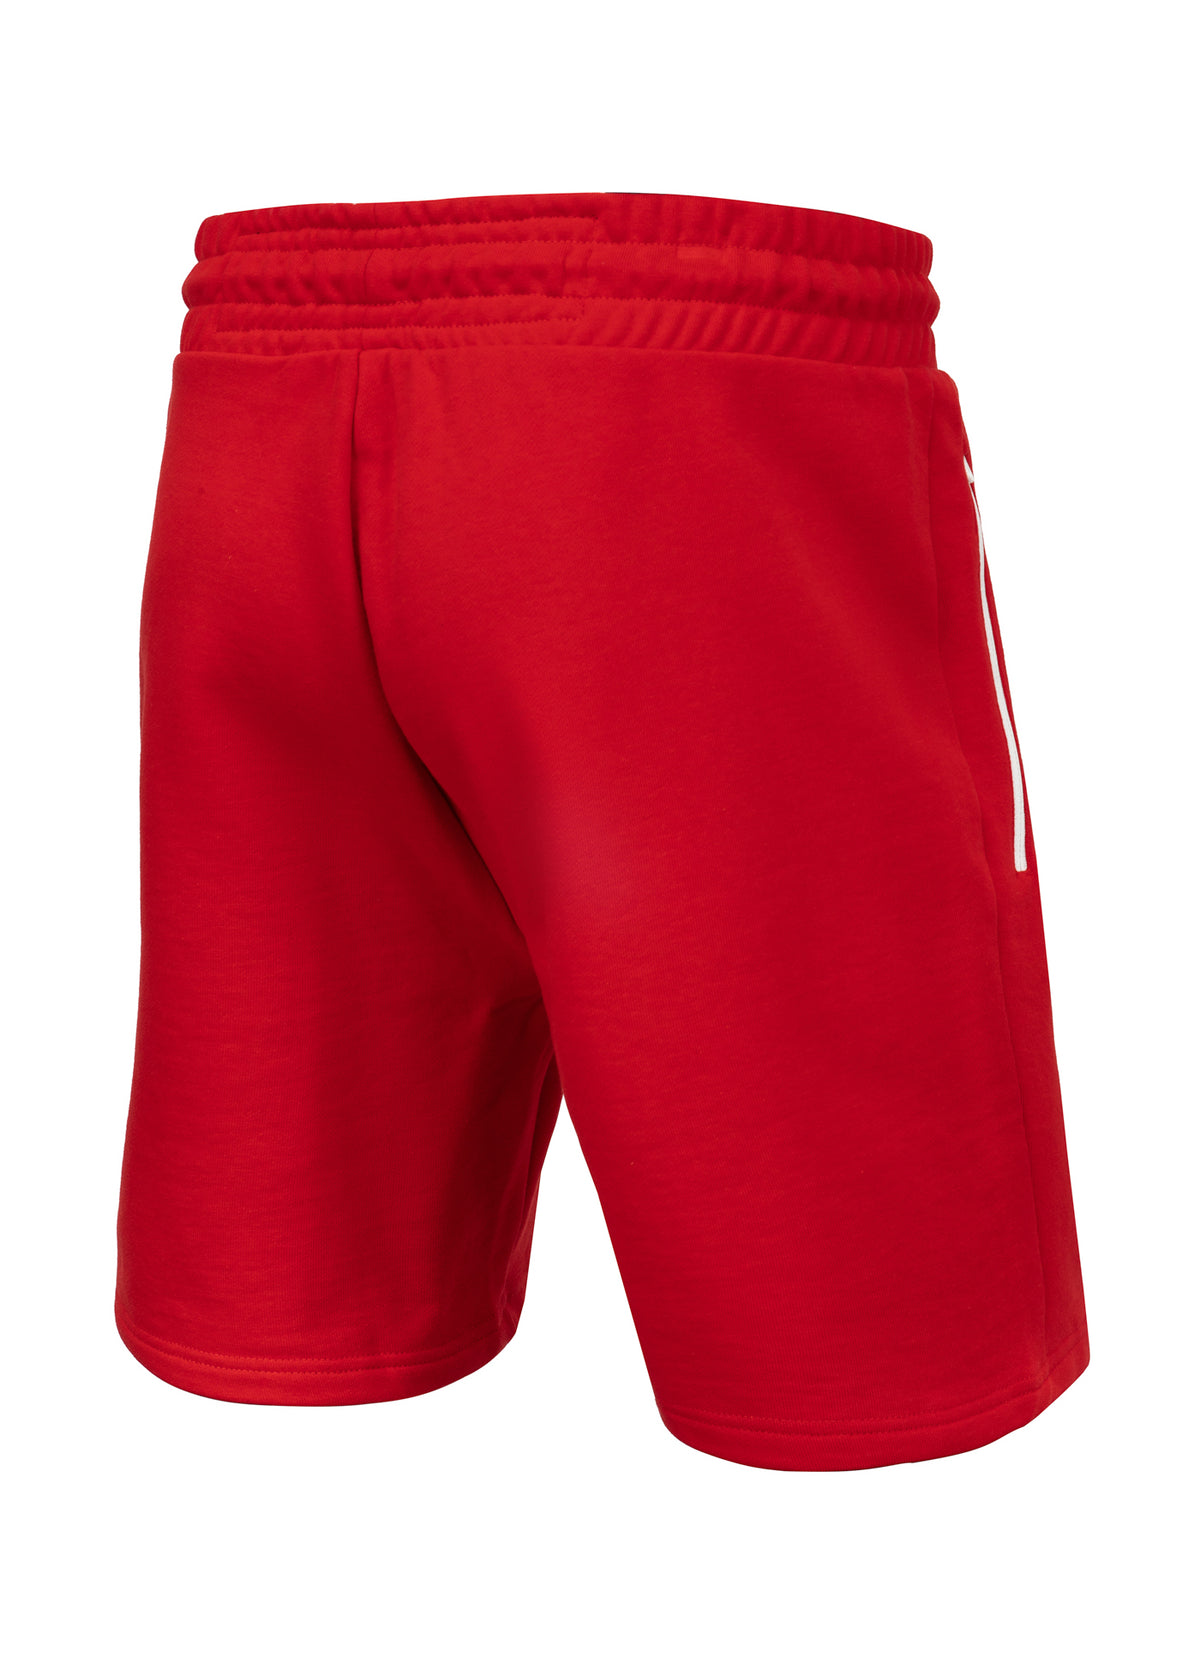 TERRY GROUP Red Shorts